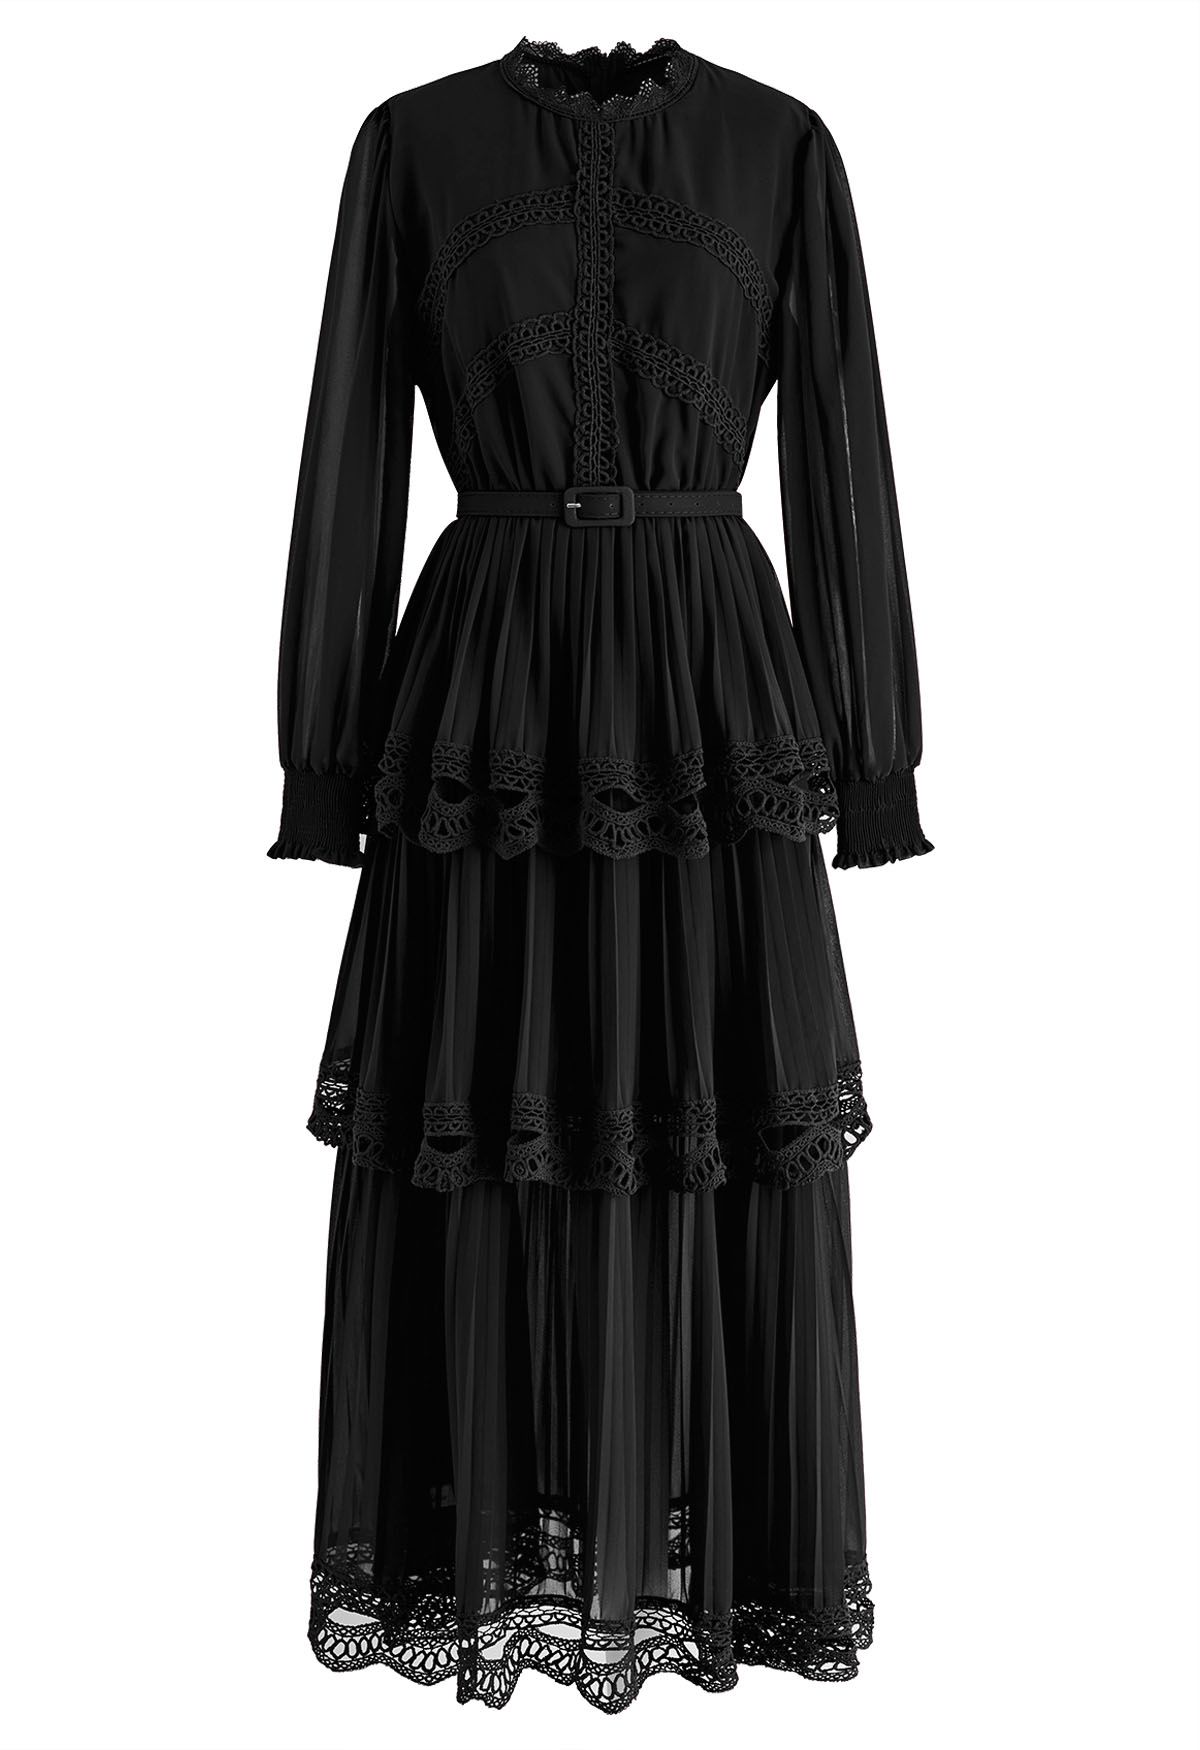 Crochet Lace Pleated Tiered Chiffon Maxi Dress in Black - Retro, Indie ...